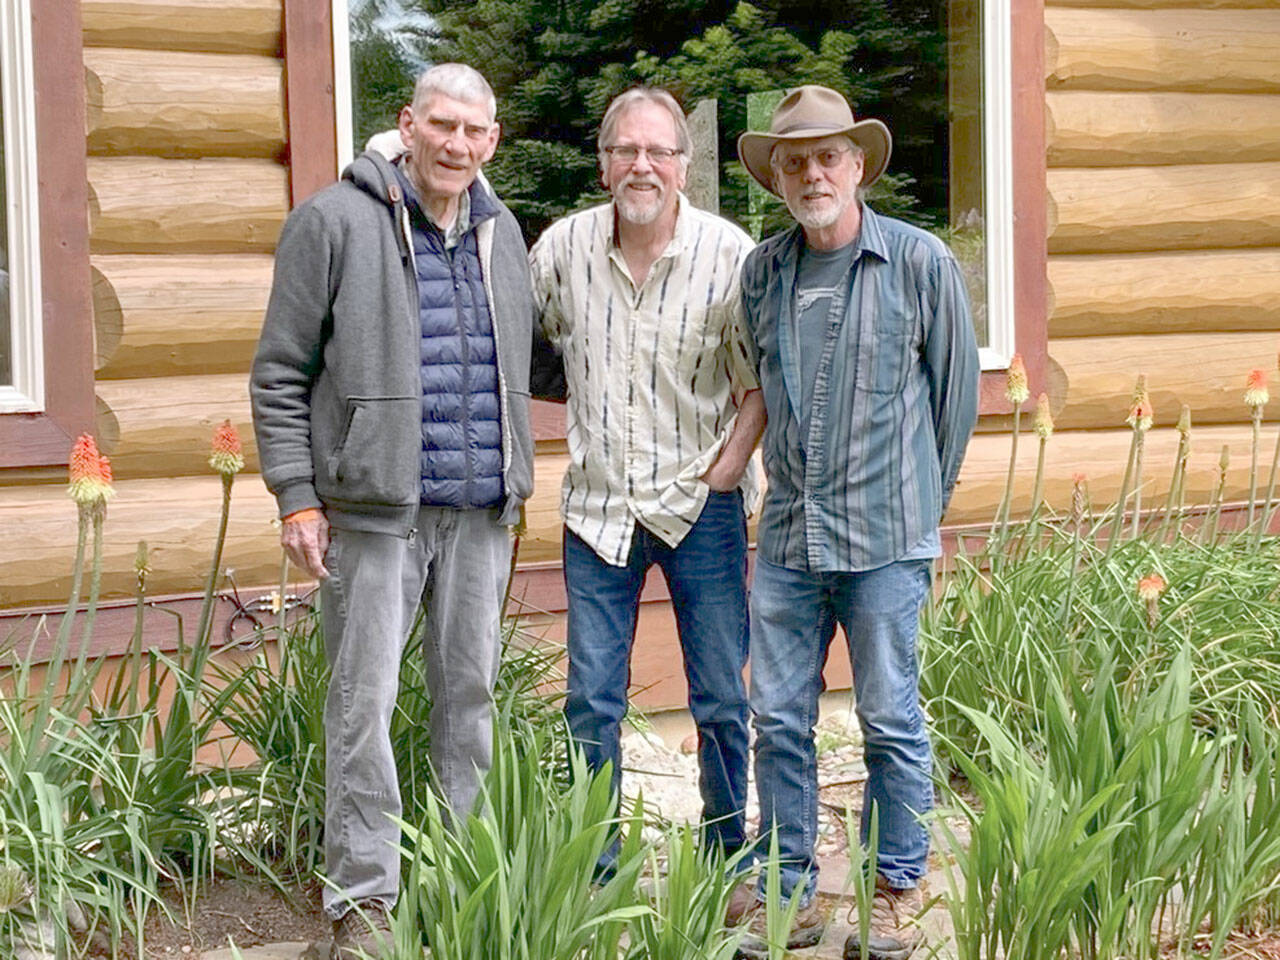 The Eagle Mountain String Band — from left, Bob Richardson, Tim Holbrook and Bill Marlow — will perform Monday.